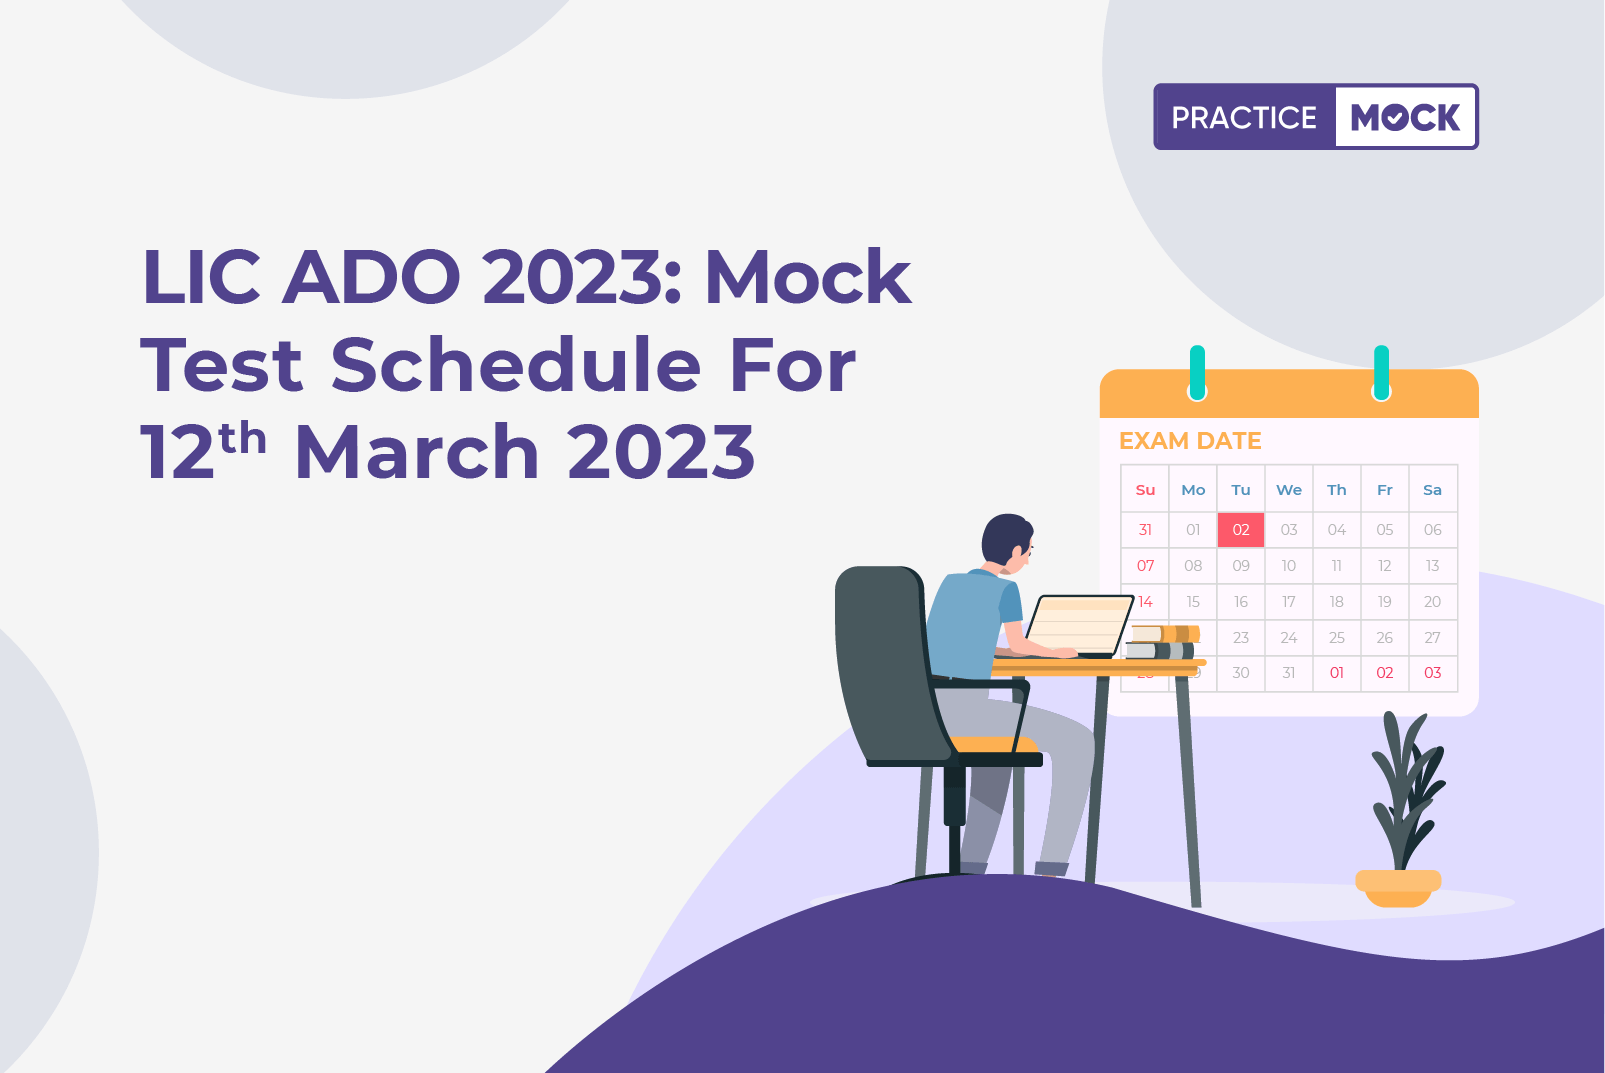 LIC ADO Mock Test Schedule for 12th March 2023